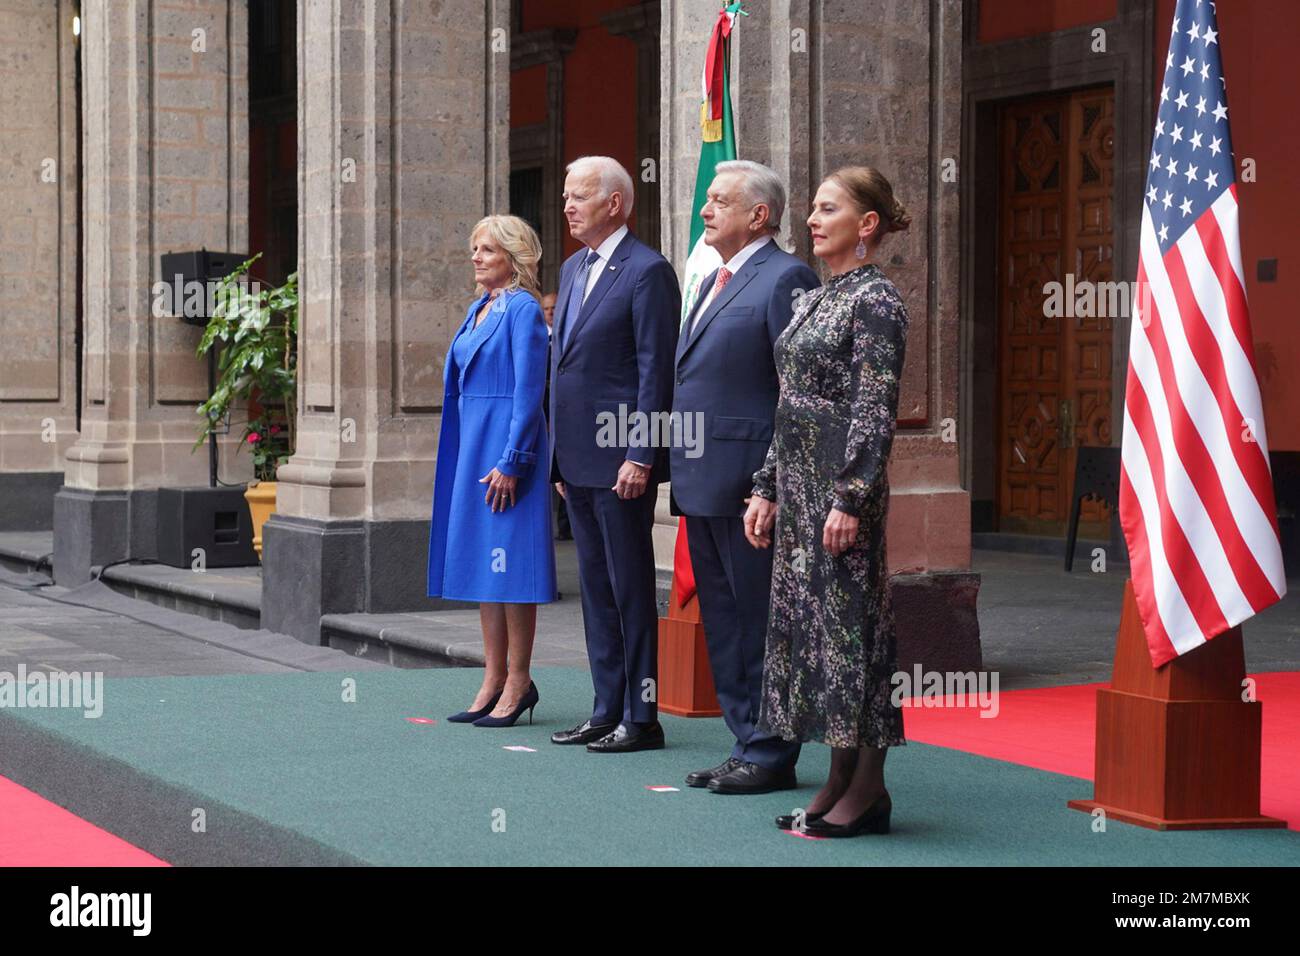 Mexico City, Mexico. 09th Jan, 2023. U.S President Joe Biden, and Mexican President Andres Manuel Lopez Obrador during the arrival ceremony before the North American Leaders Summit at the Palacio Nacional, January 9, 2023 in Mexico City, Mexico. Standing from left: First lady Jill Biden, U.S. President Joe Biden, Mexican President Andres Manuel Lopez Obrador and his wife Beatriz Gutierrez Muller. Credit: Presidencia de la Republica Mexicana/Mexican Presidents Office/Alamy Live News Stock Photo